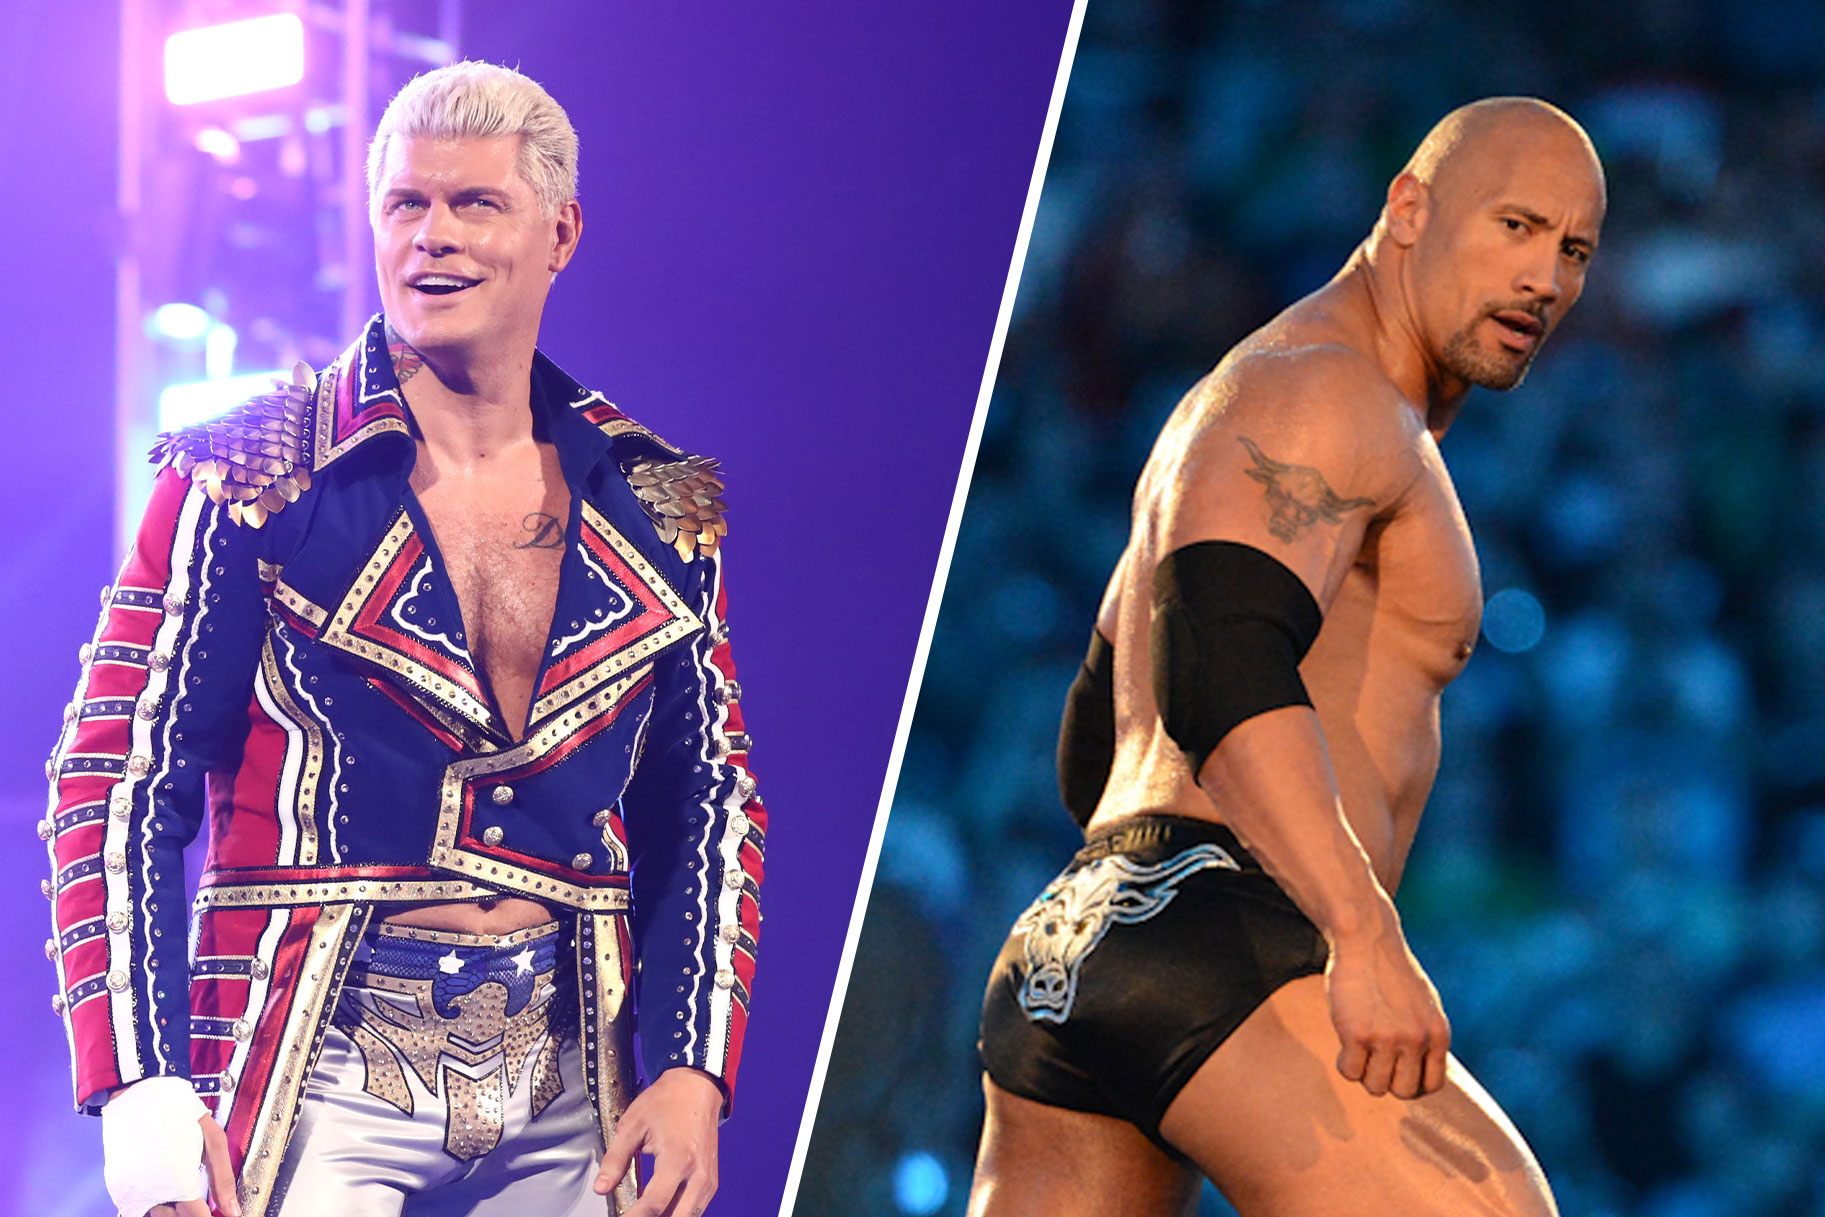 The Rock's Bold Proclamation and Cody Rhodes' WrestleMania Ambitions Set WWE Ablaze